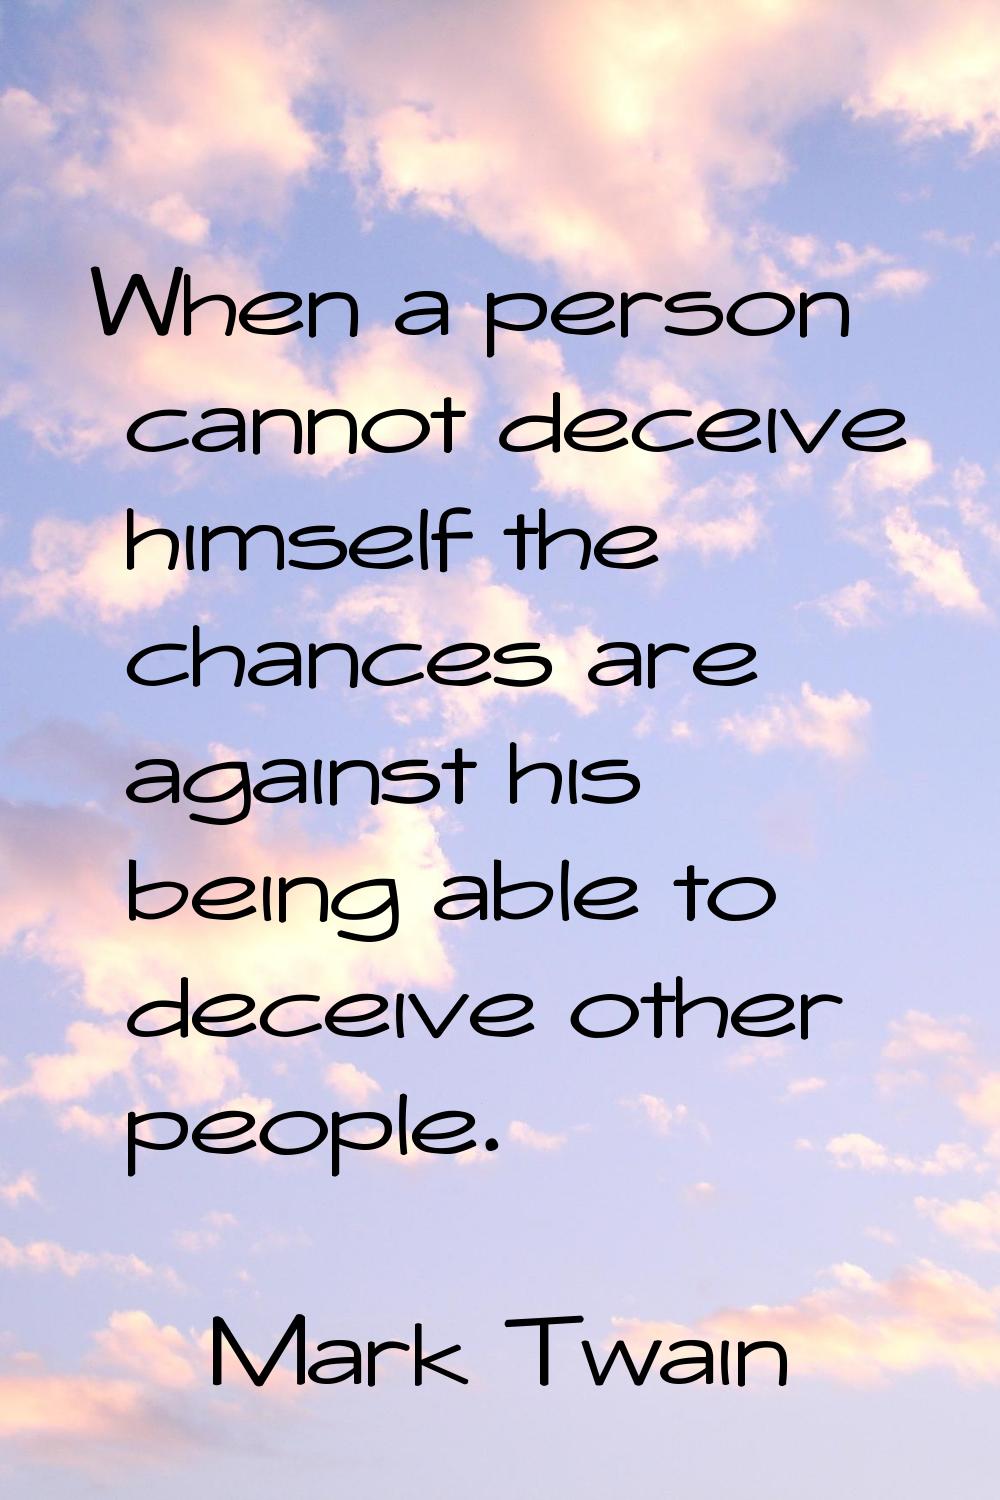 When a person cannot deceive himself the chances are against his being able to deceive other people